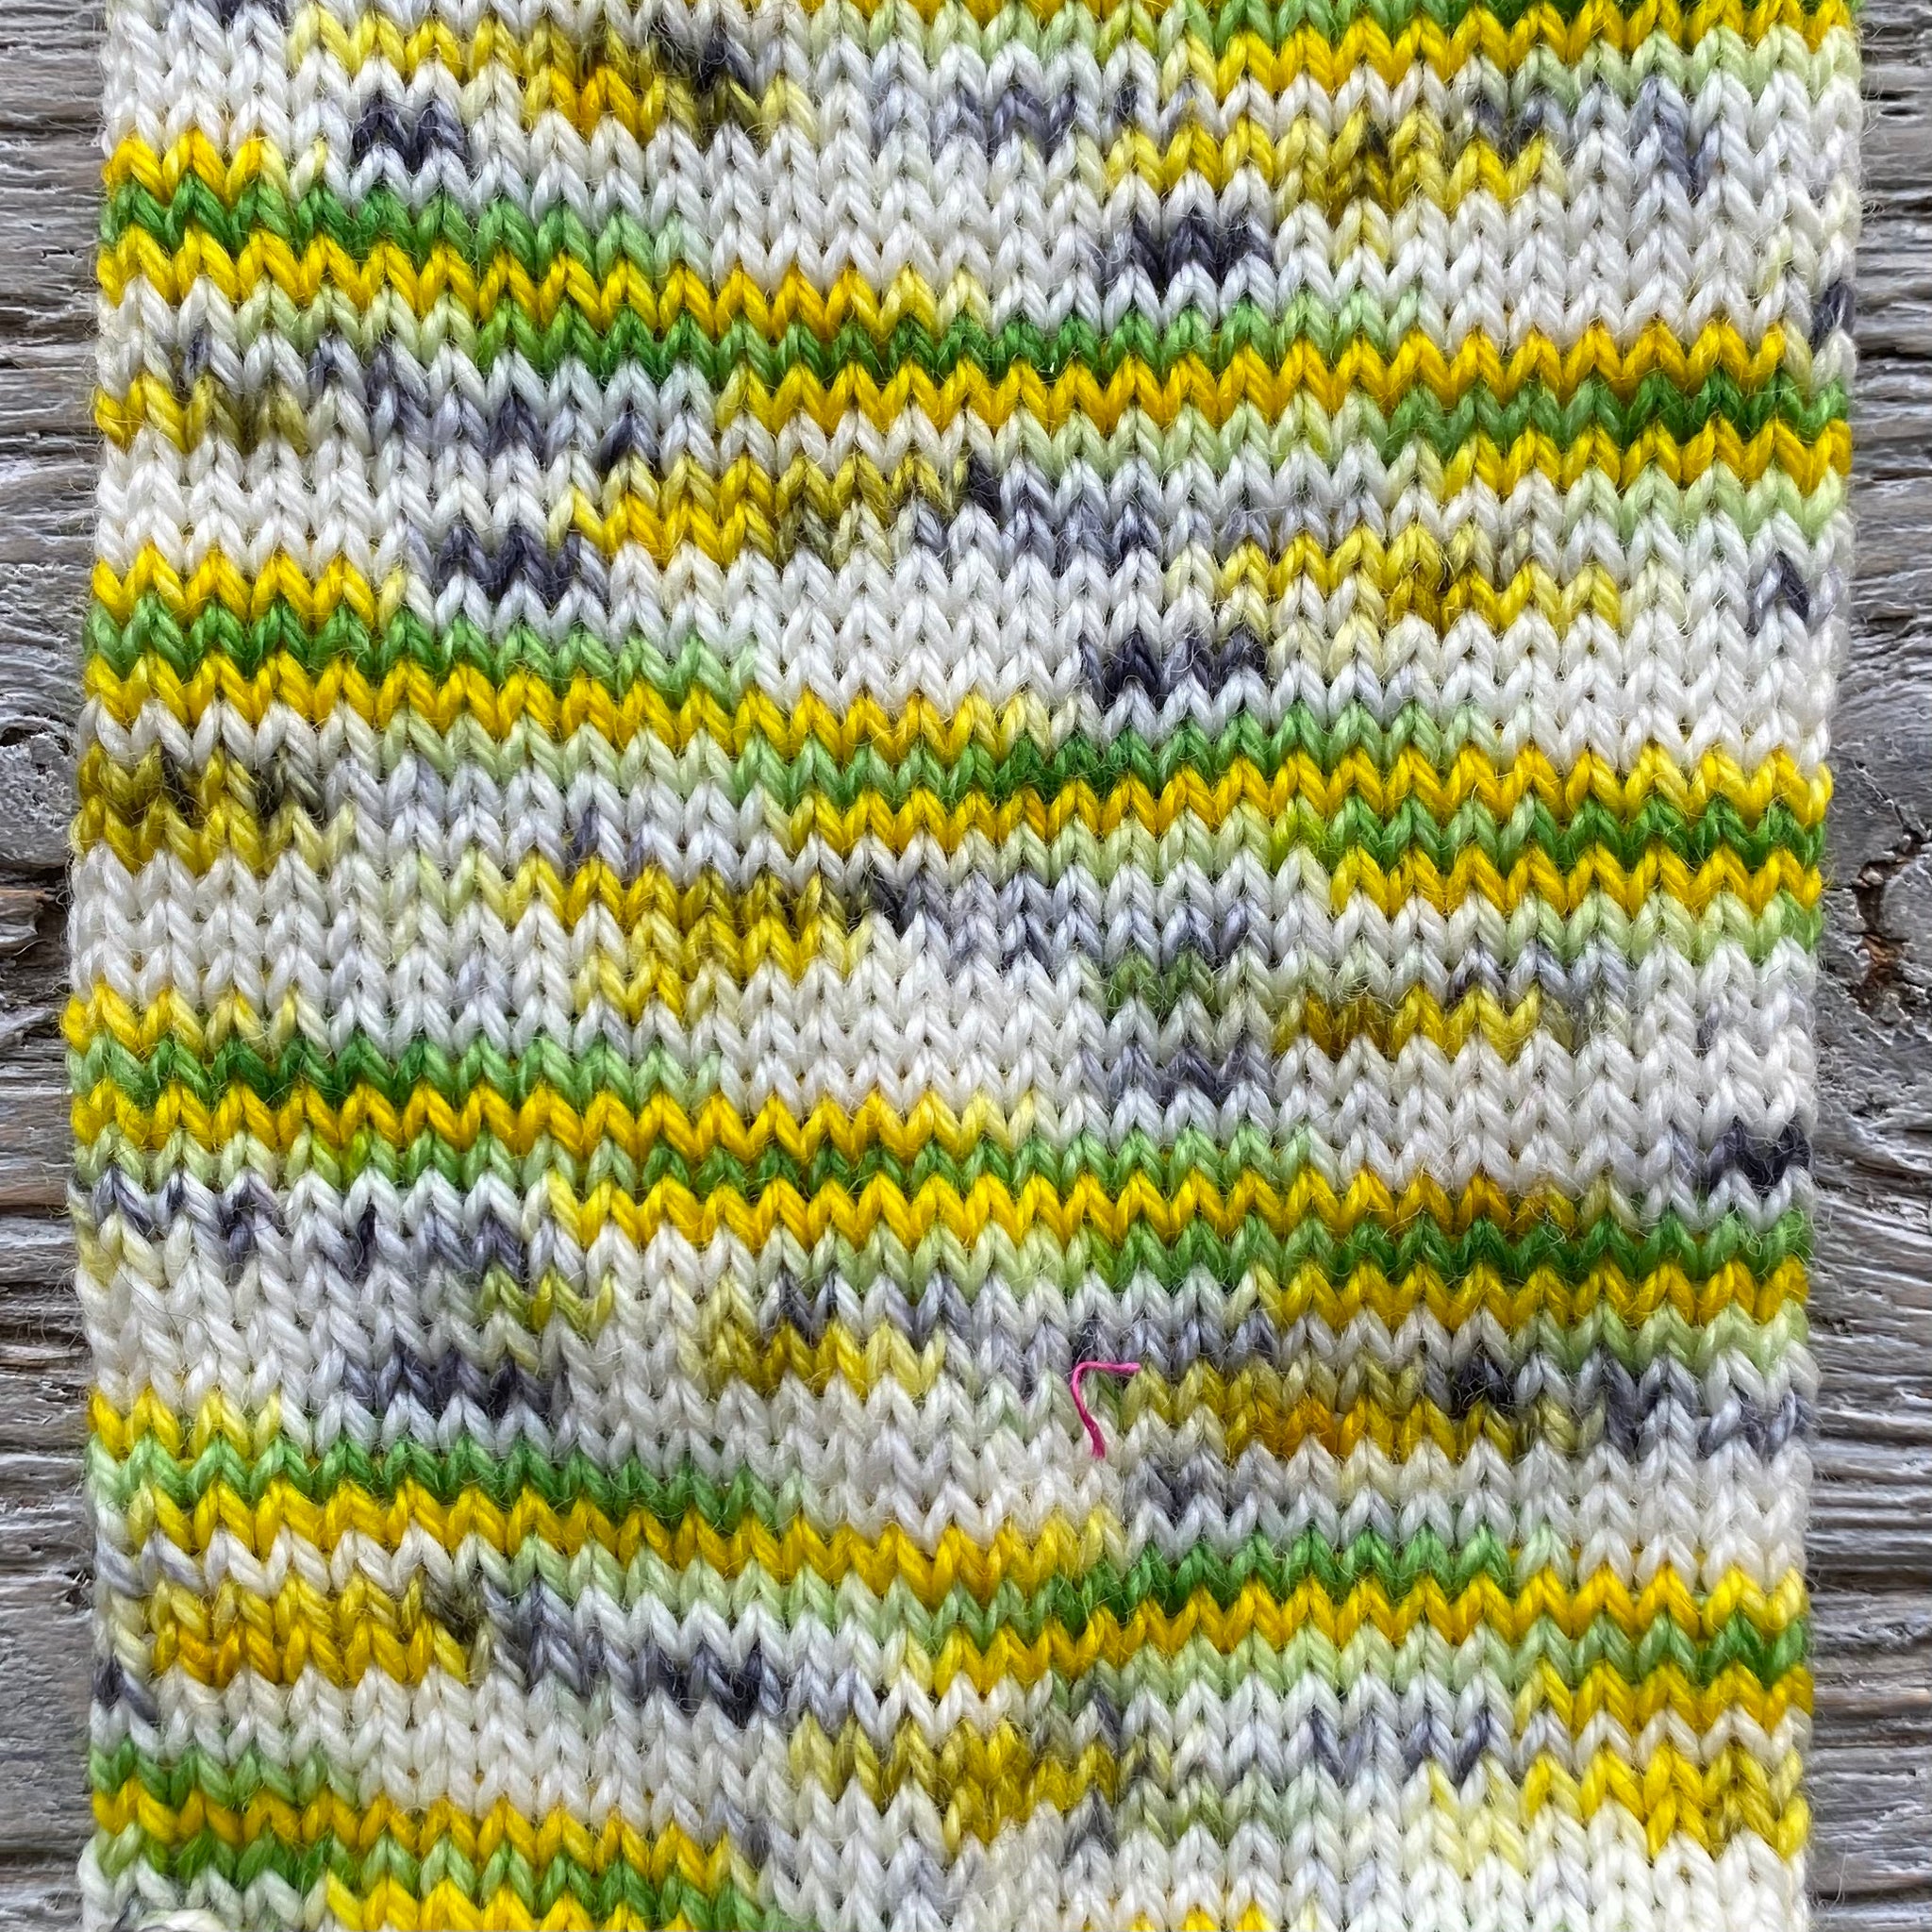 Broken Rainbow Classic DK Green and Yellow - Don’t Forget to Eat